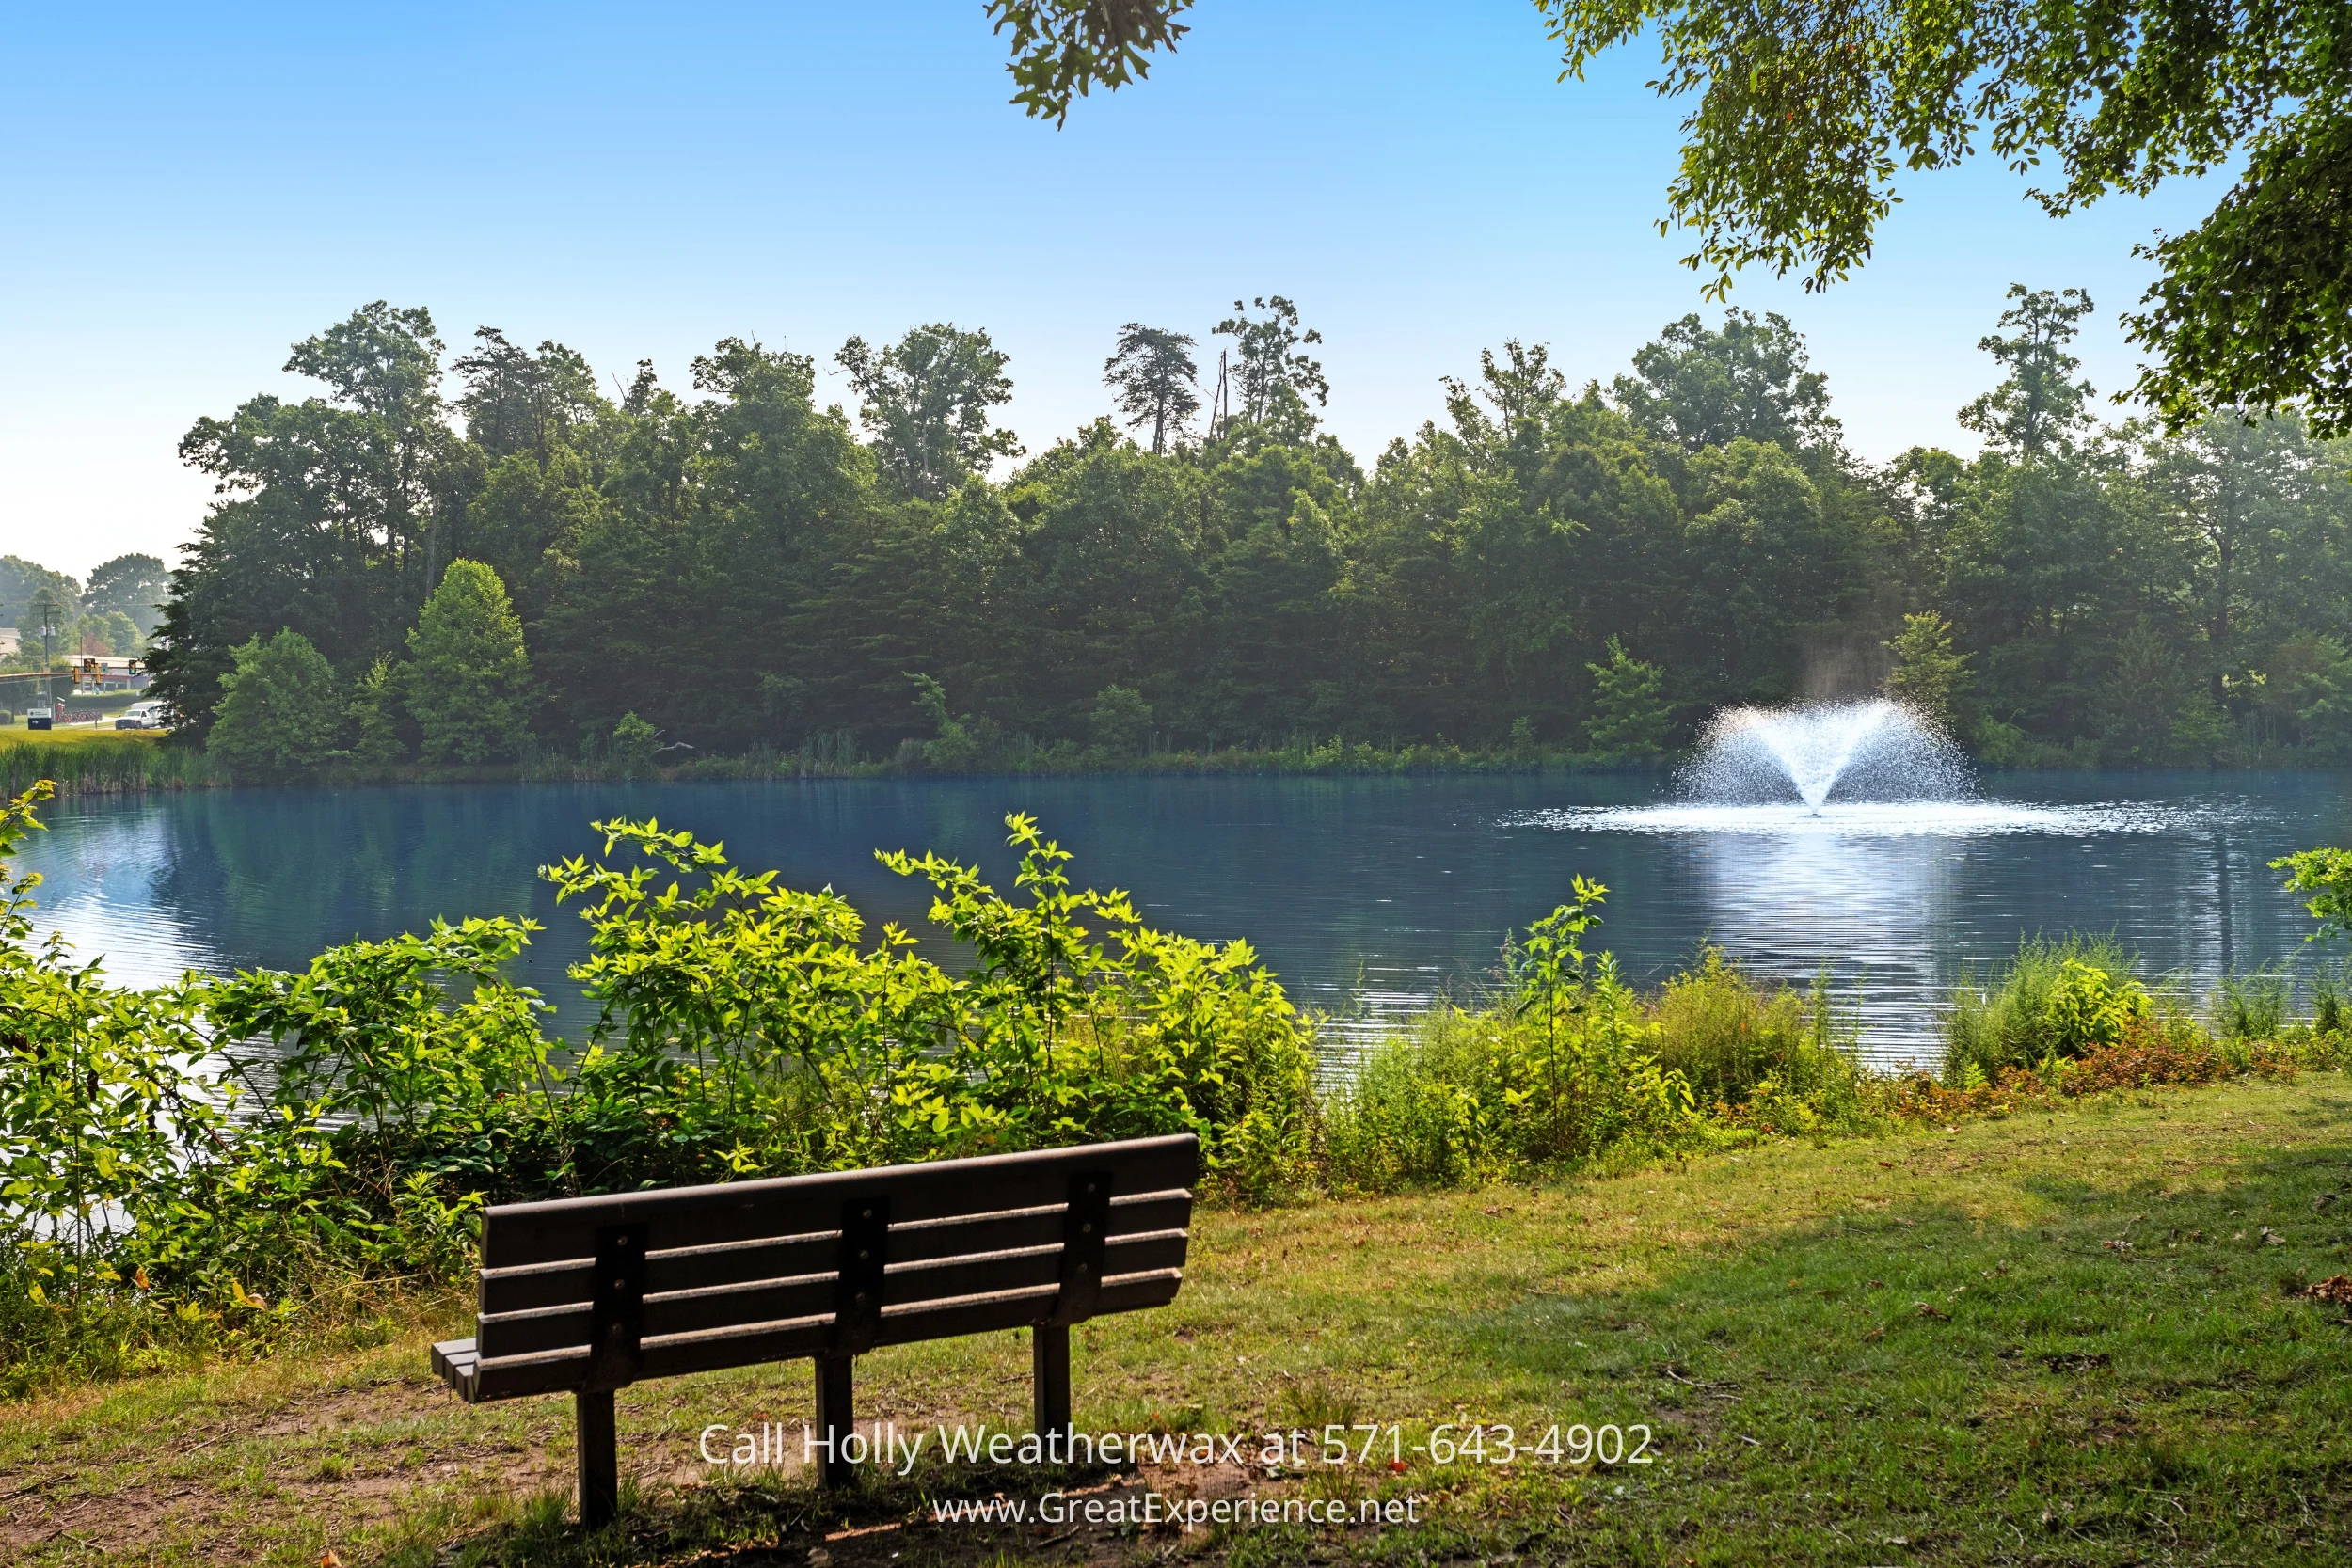 A serene park bench next to a pond with a fountain in the middle, surrounded by trees